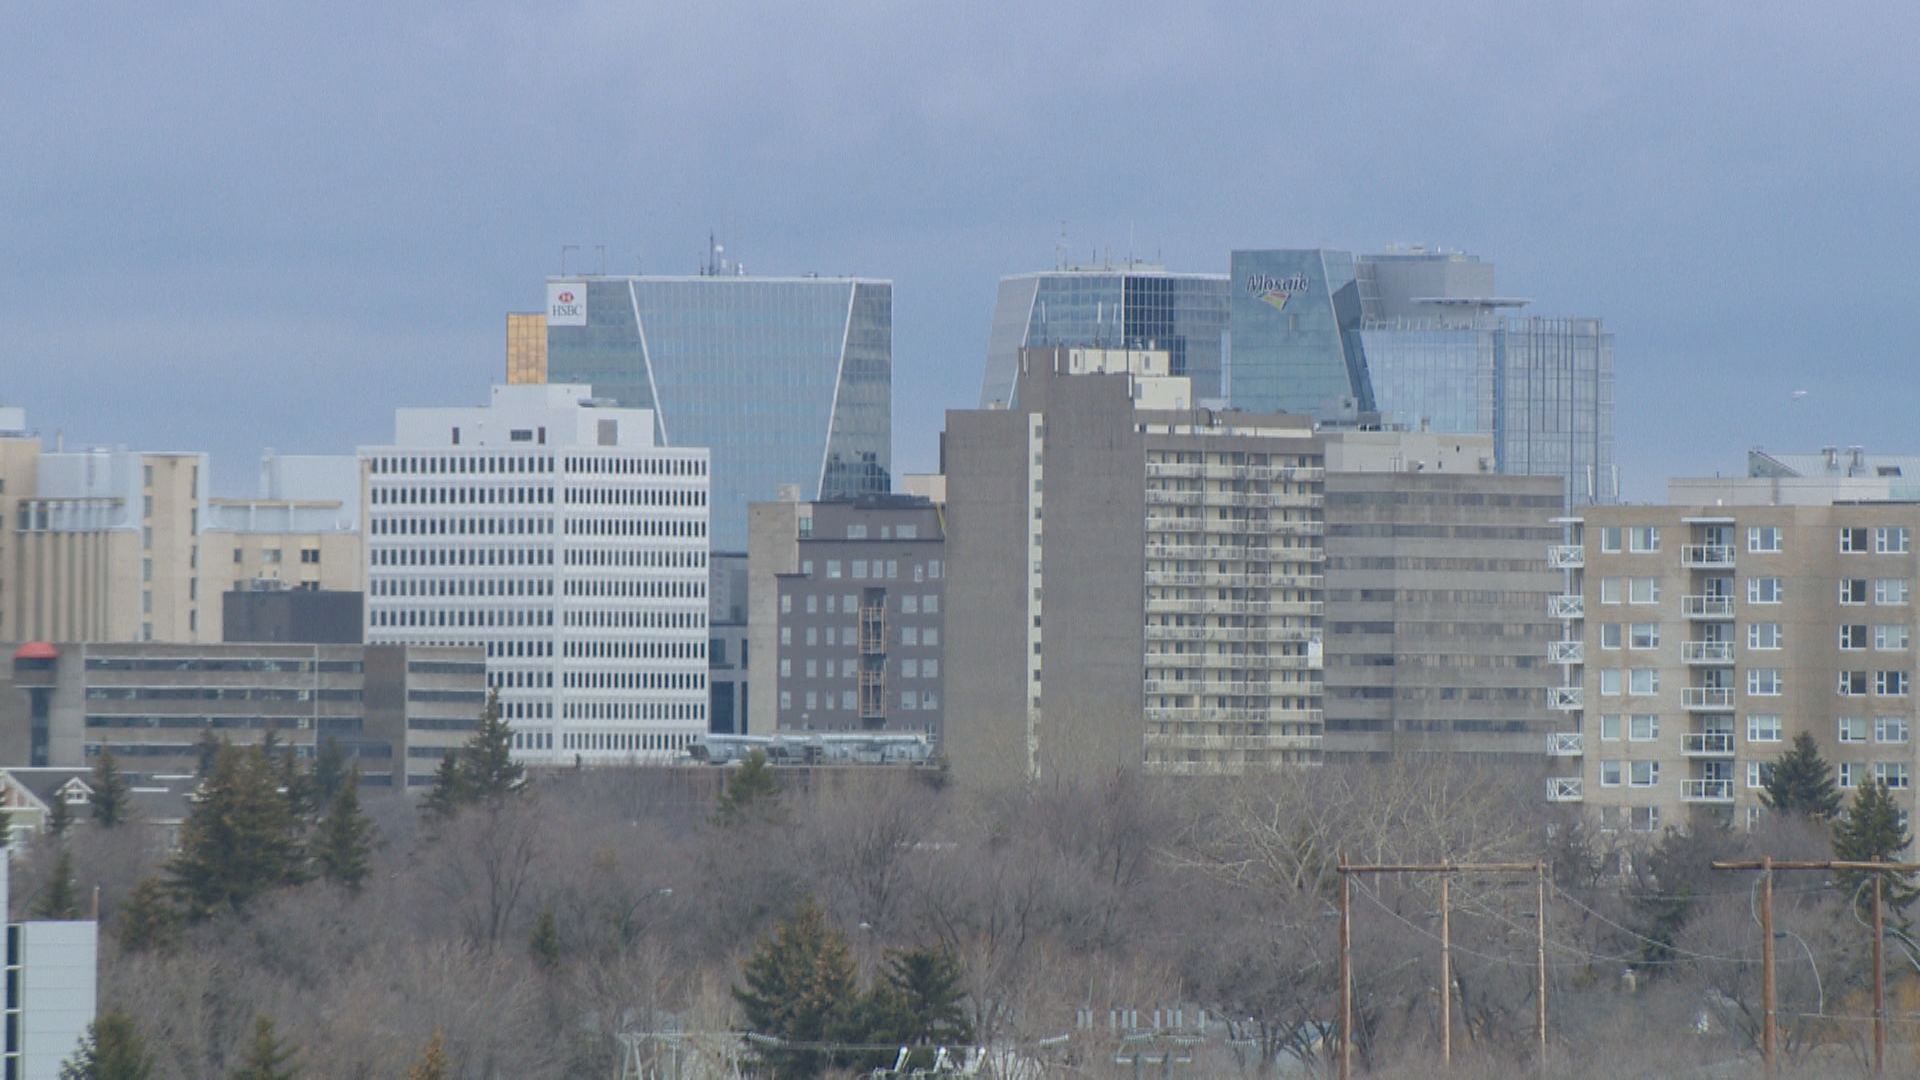 Regina’s downtown district aims to enhance vibrancy with new initiatives